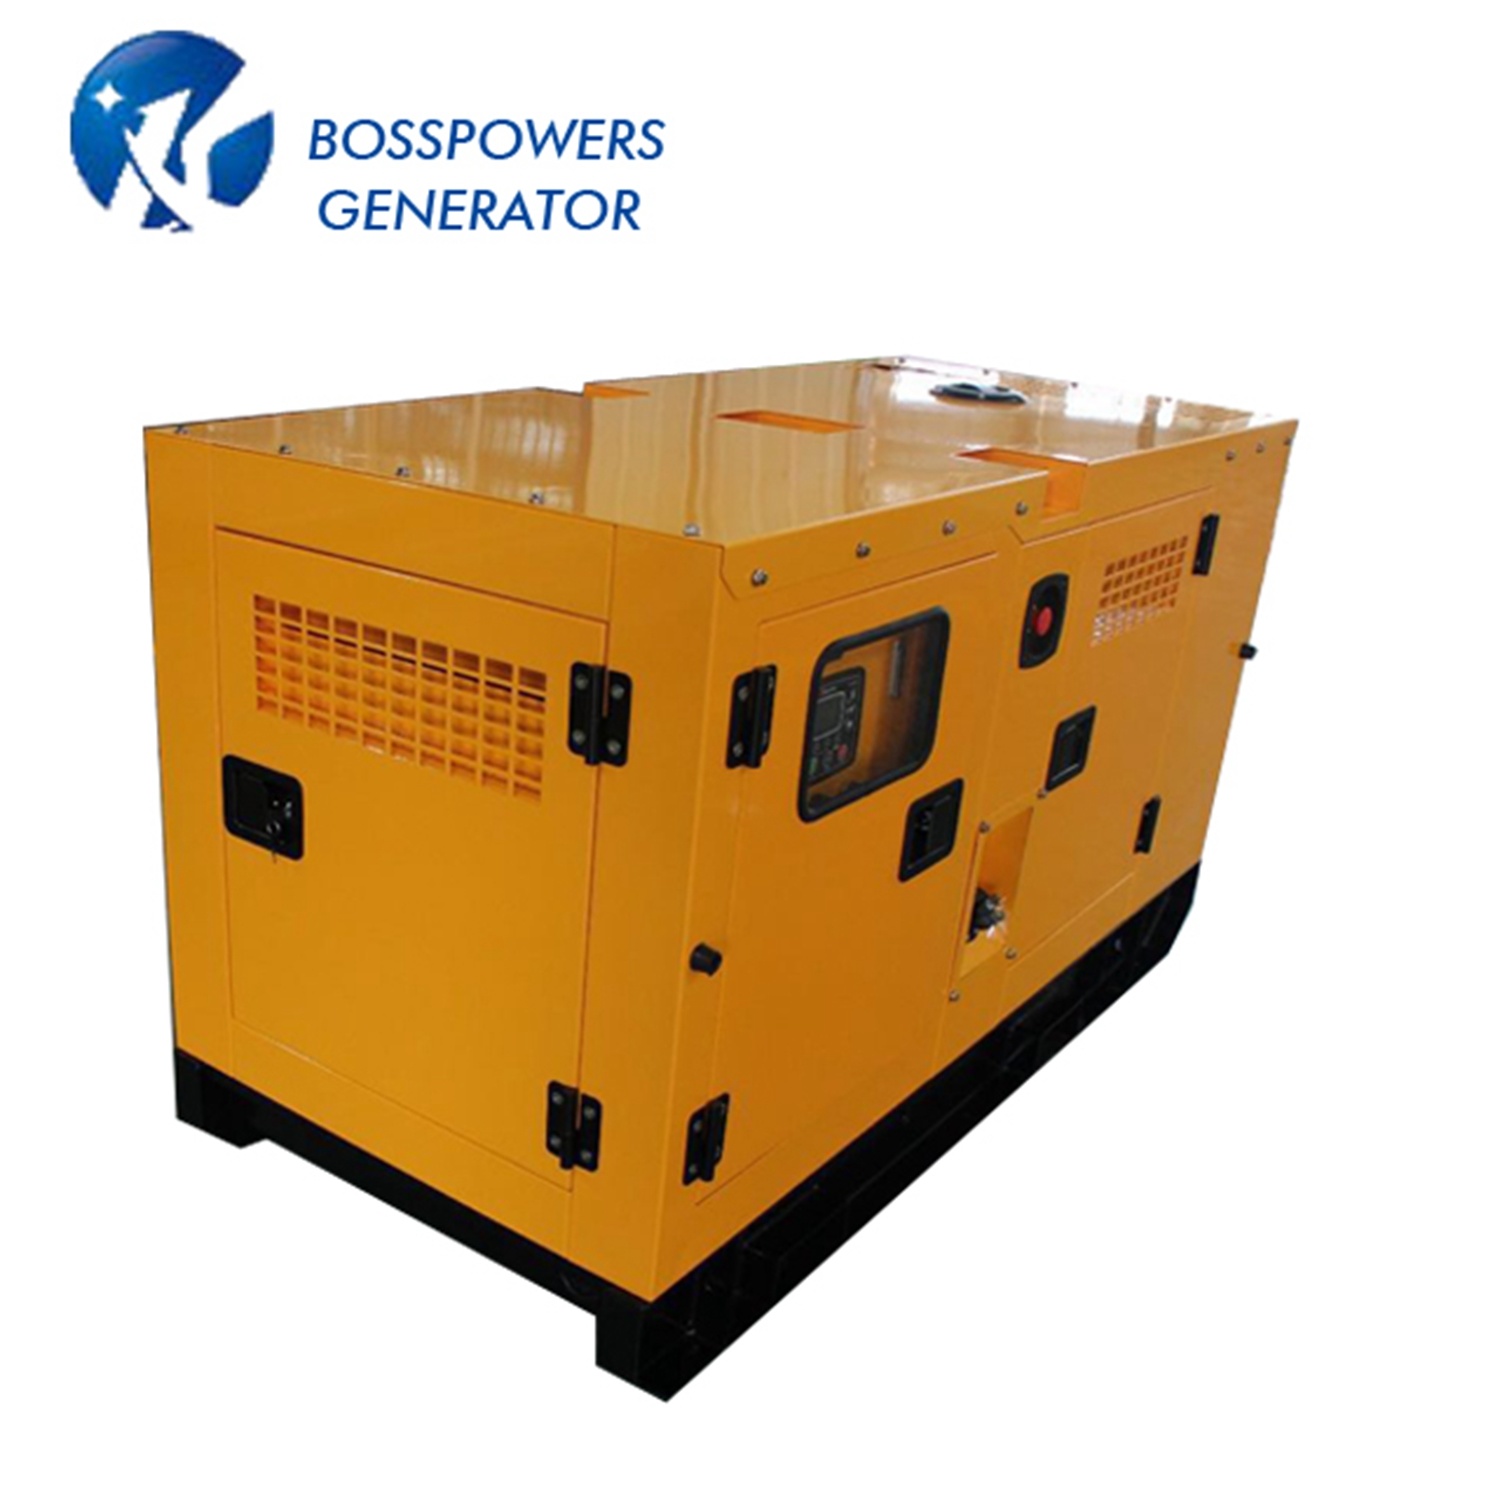 400kVA Diesel Generator Base Fuel Tank Powered by 2206A-E13tag5